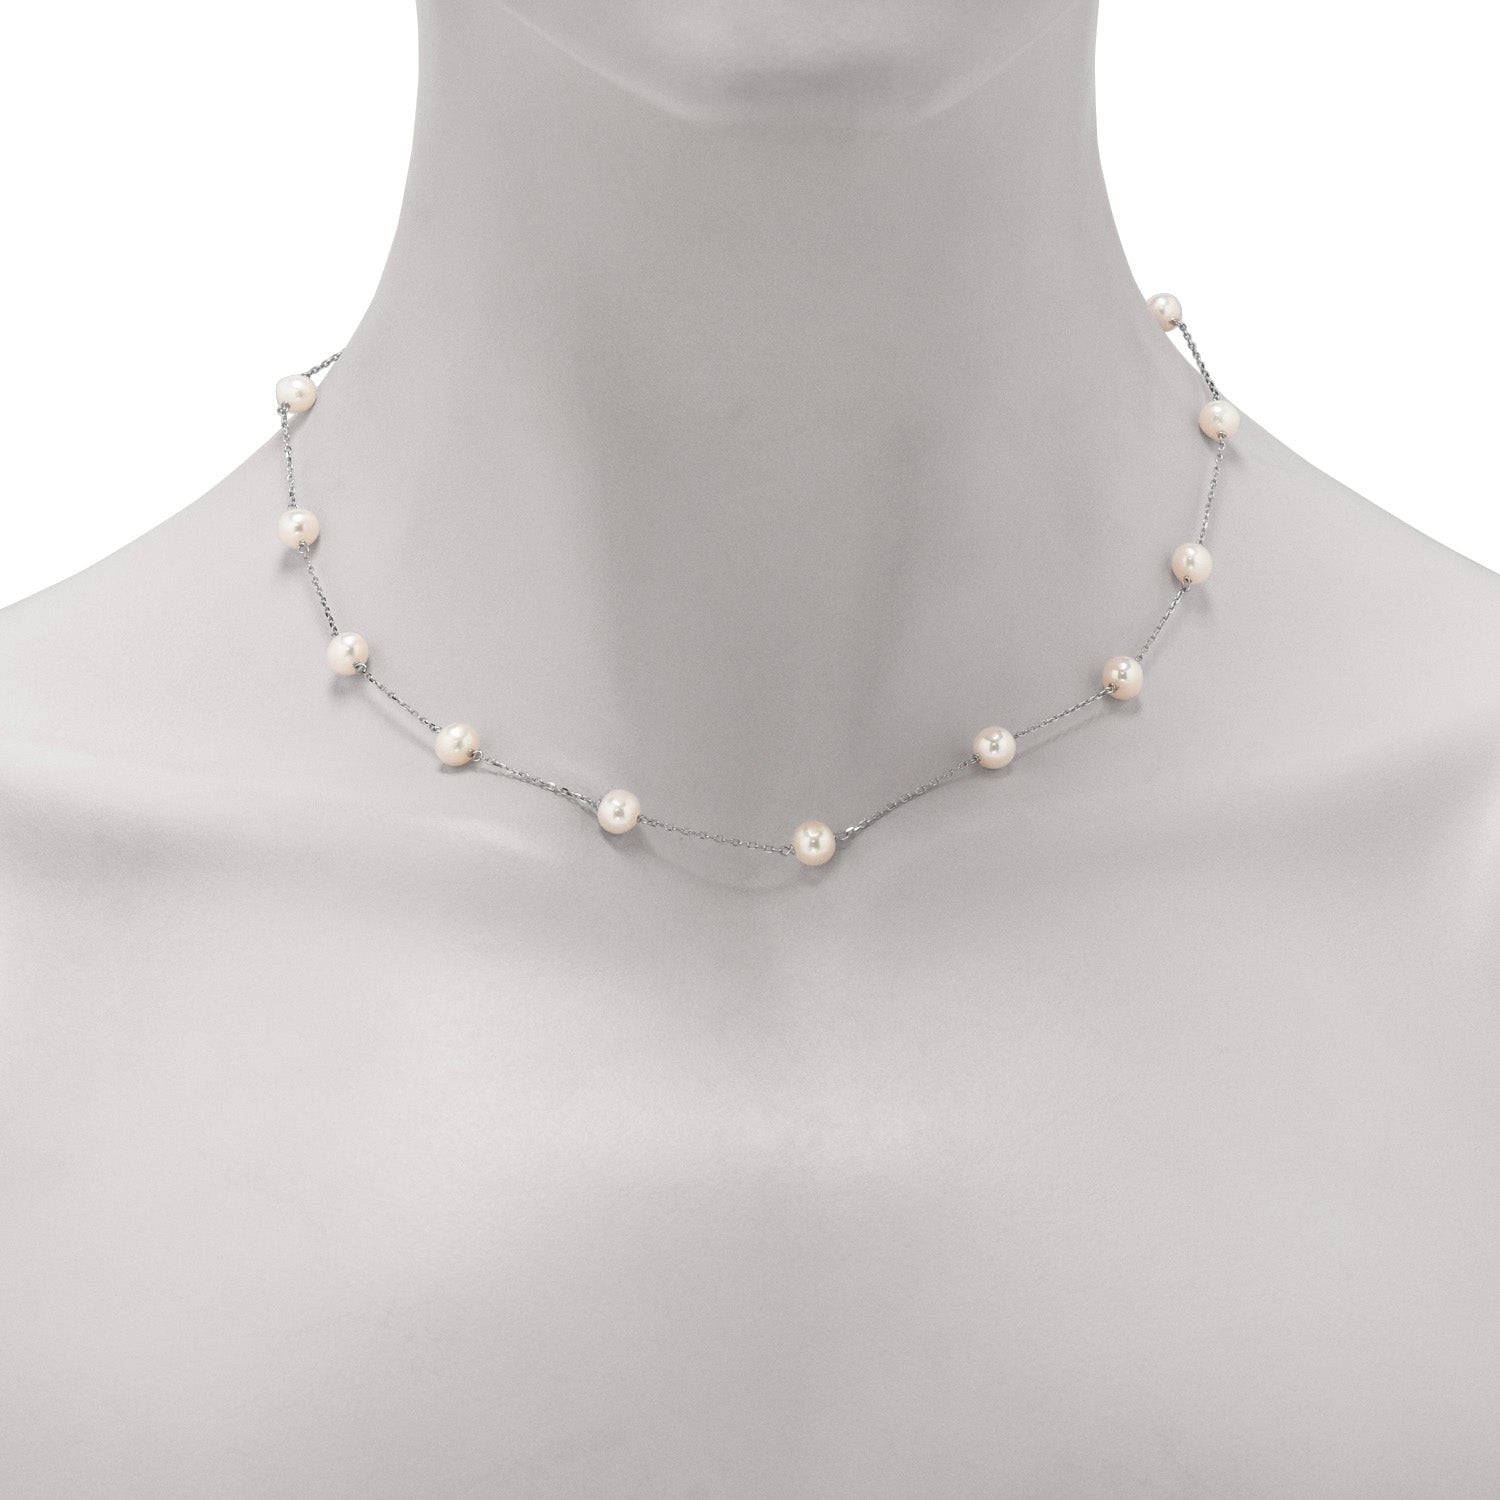 Cultured Freshwater Pearl Necklace in 14kt White Gold (5-6mm pearls)